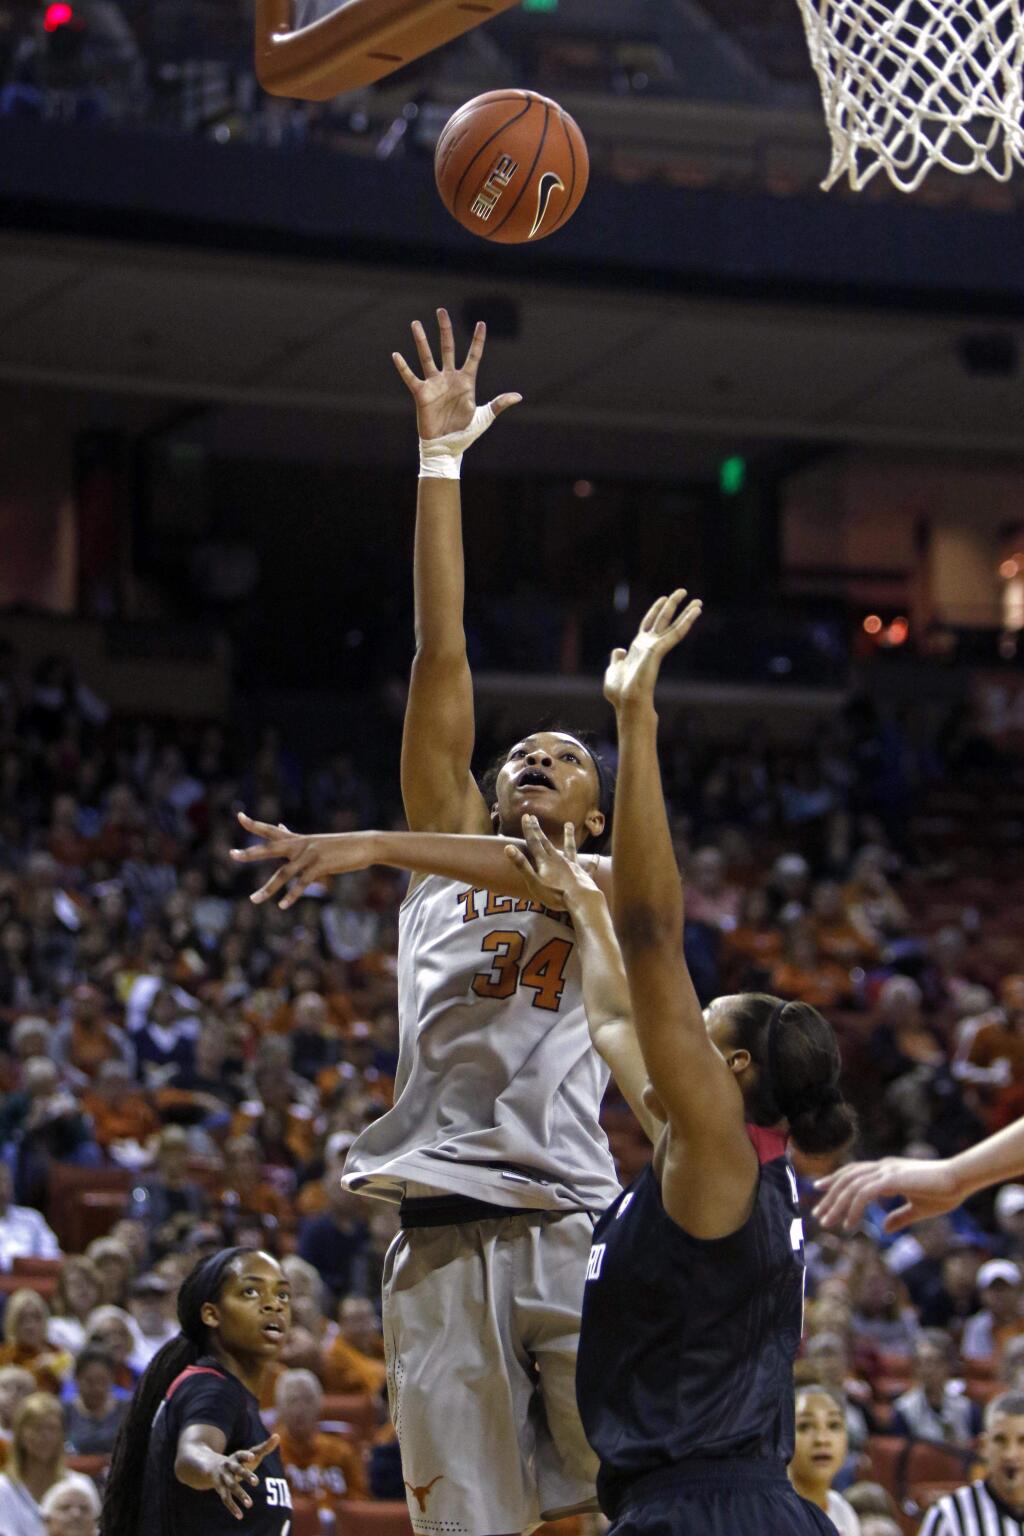 Texas center Imani Boyette (34) shoots against Stanford forward Erica McCall during the first half of an NCAA college basketball game, Sunday, Dec. 13, 2015, in Austin, Texas. (AP Photo/Michael Thomas)